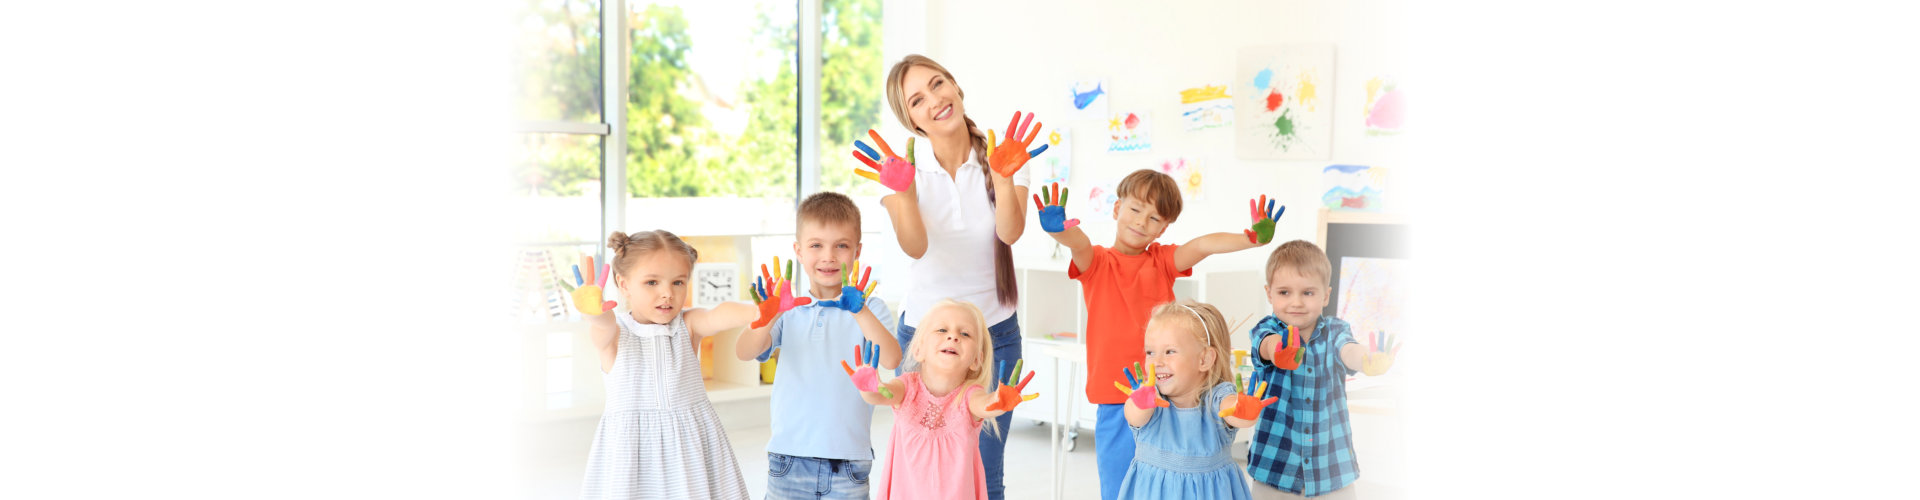 teacher and students waving their hands with paint on it